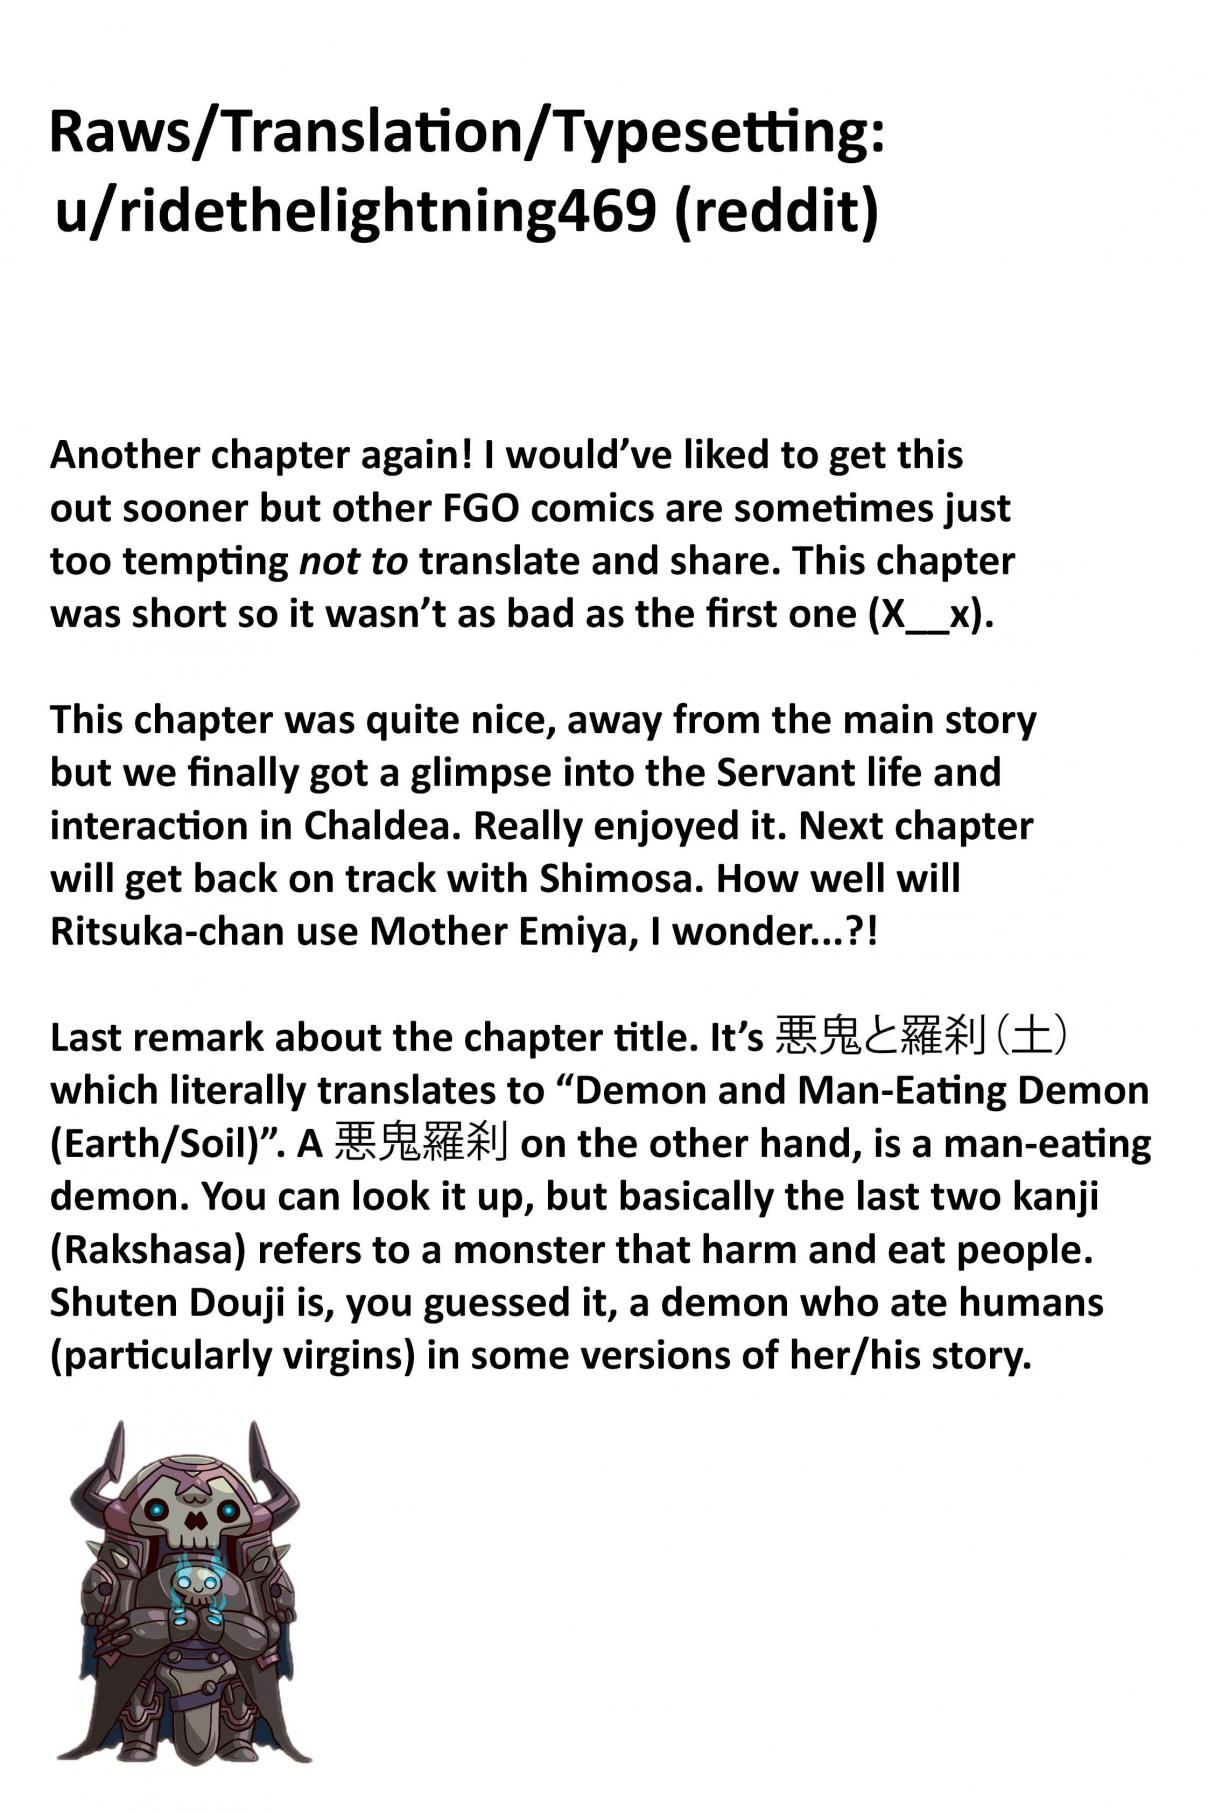 Fate/Grand Order: Epic of Remnant Variant Singularity III: A Stage of Corpse Hills and Bloody Rivers Shimousanokuni: Showdown with the Seven Swordmaster Heroic Spirits Ch. 2 The Demon and the Rakshasa